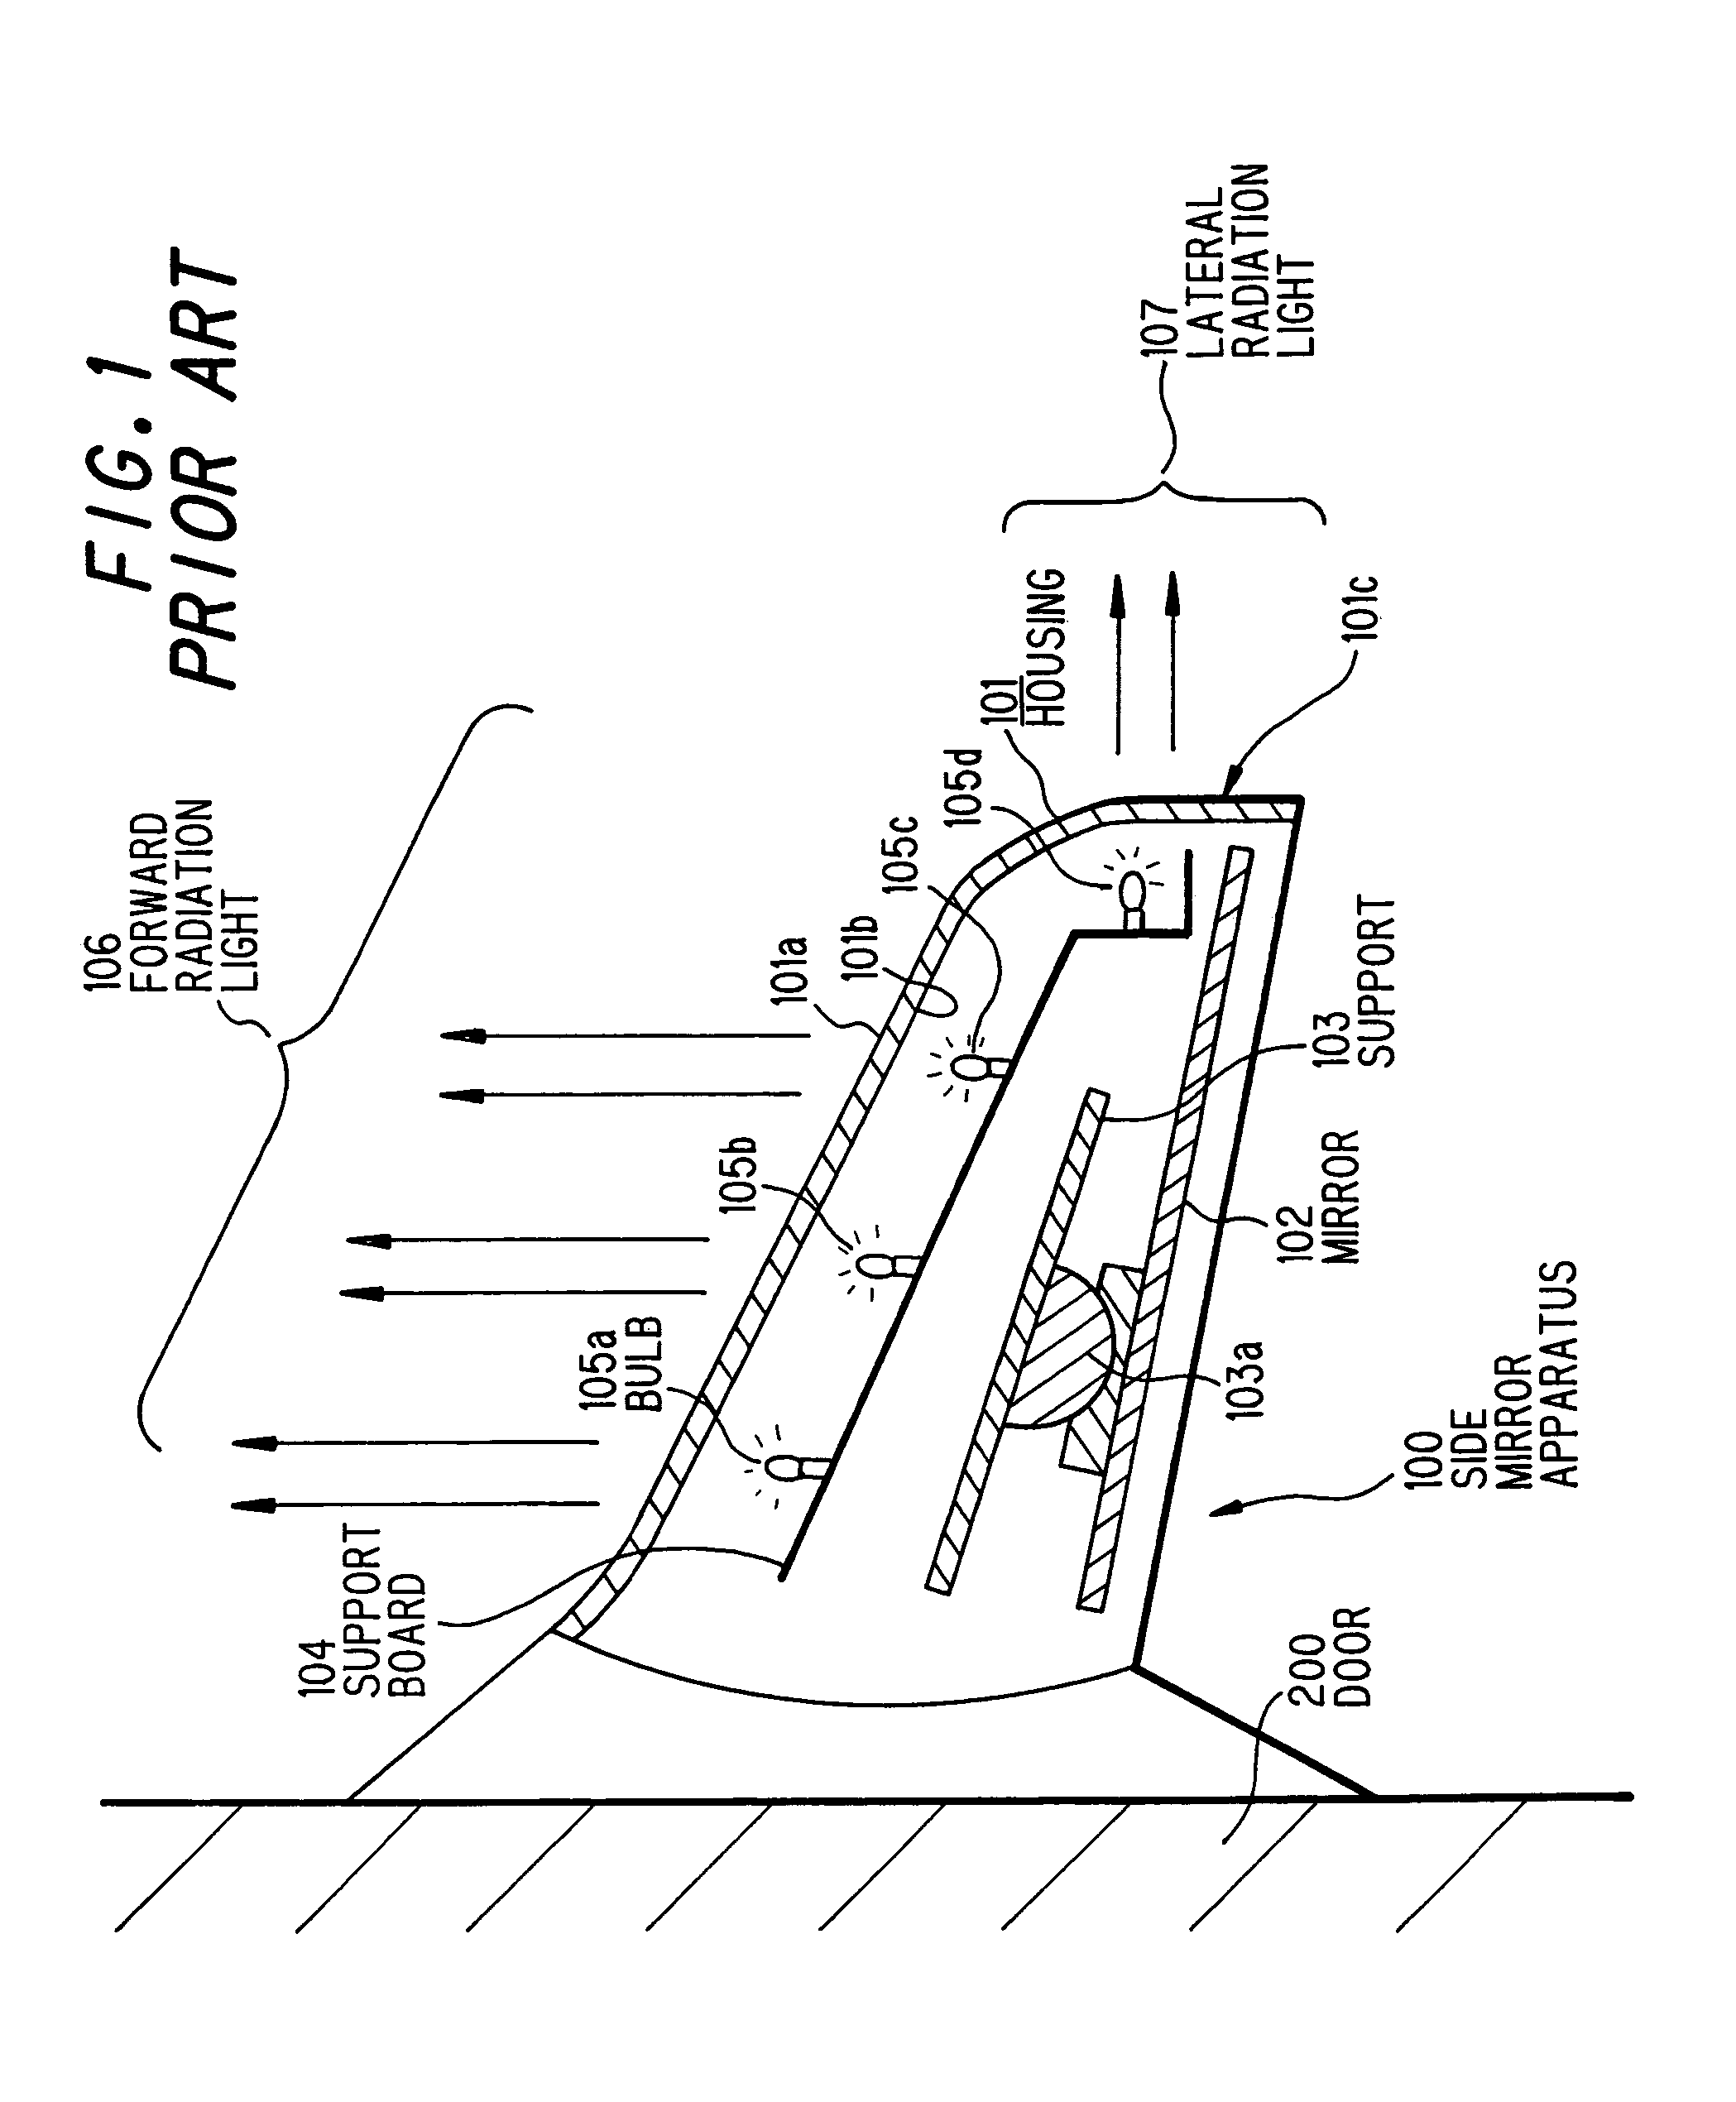 Vehicle rearview mirror including a light-emitting diode apparatus